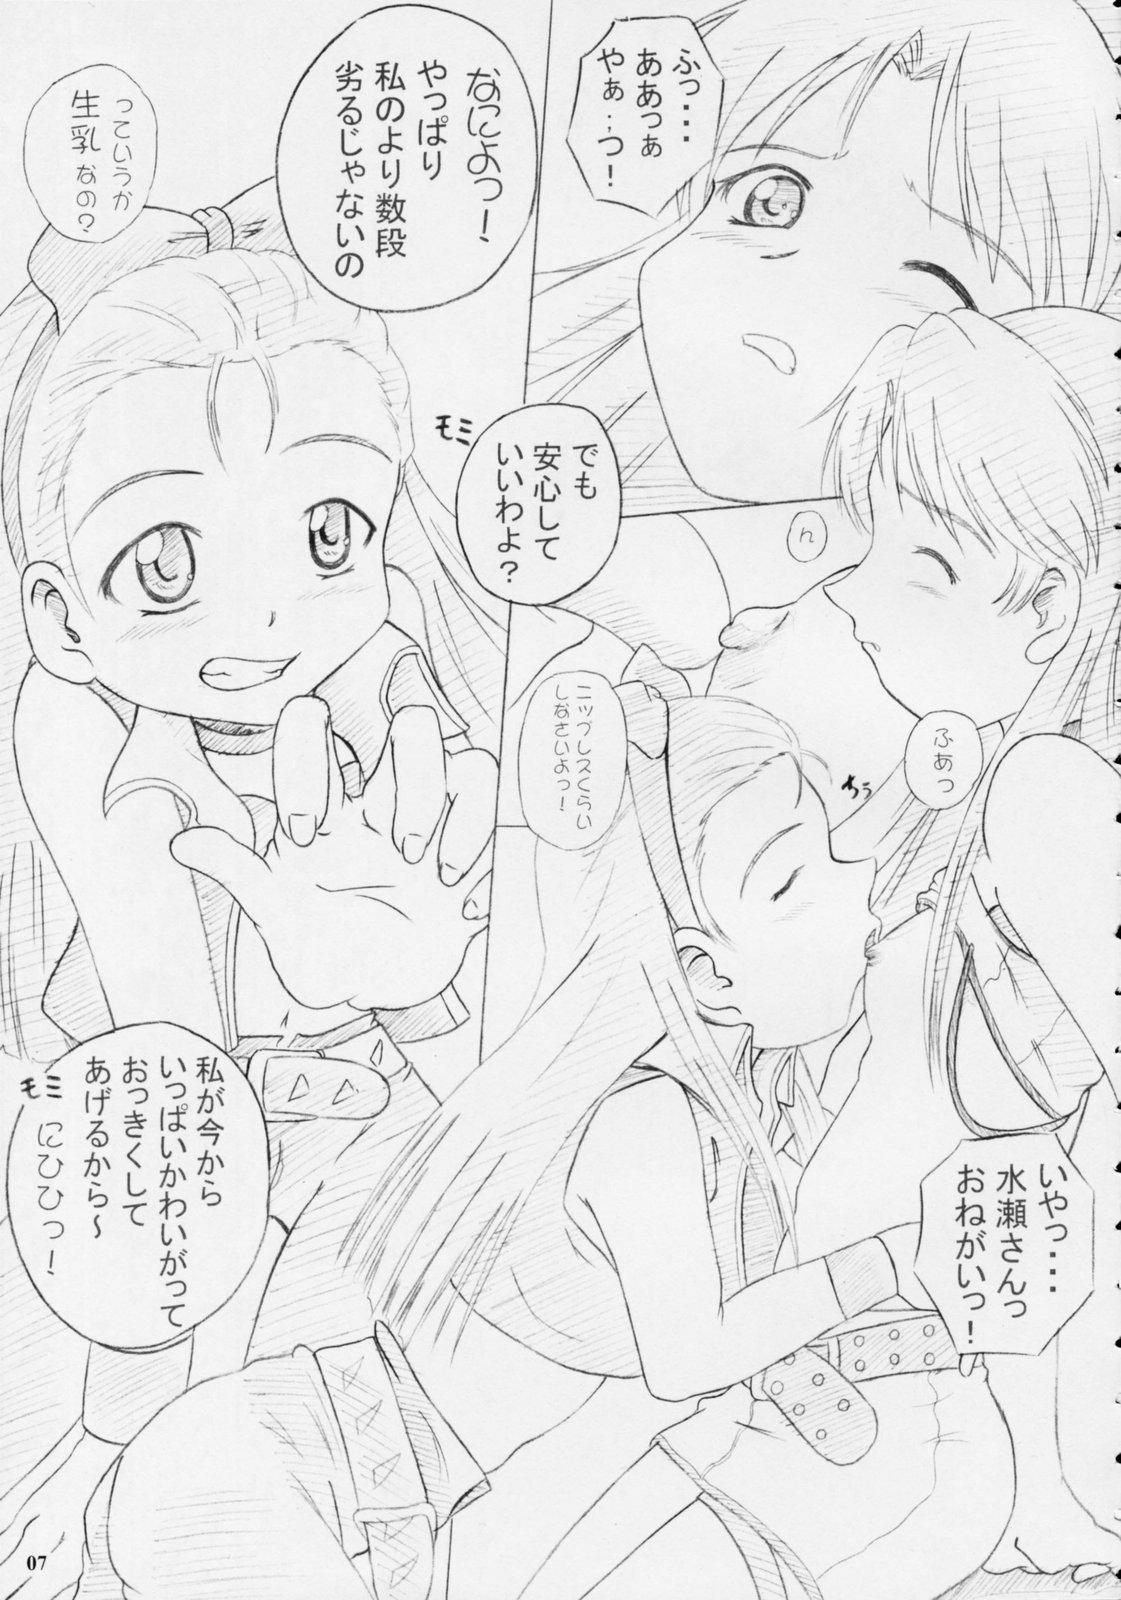 Prima i-M@ster&slaves - The idolmaster Defloration - Page 7